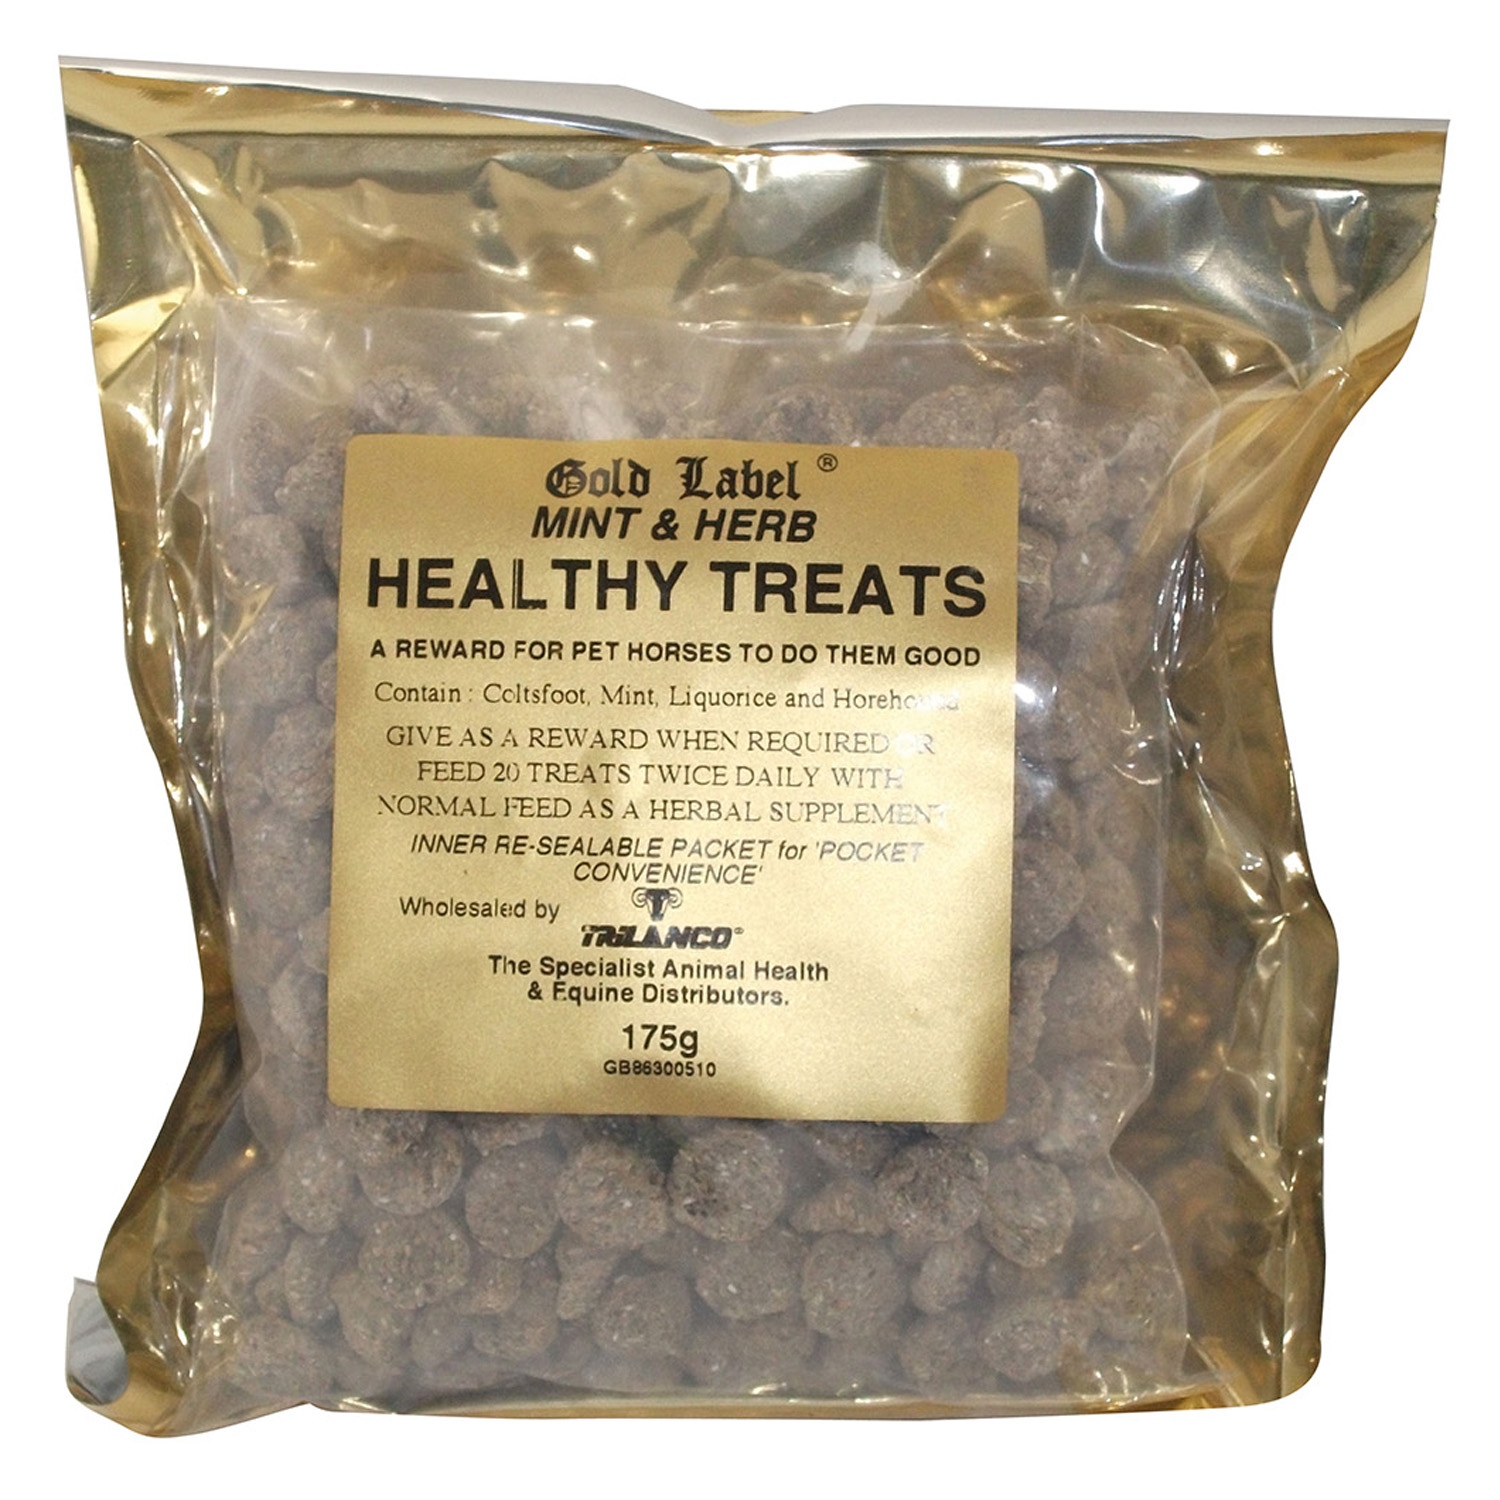 GOLD LABEL HERBAL HEALTHY TREATS MINT/HERB 175 GM